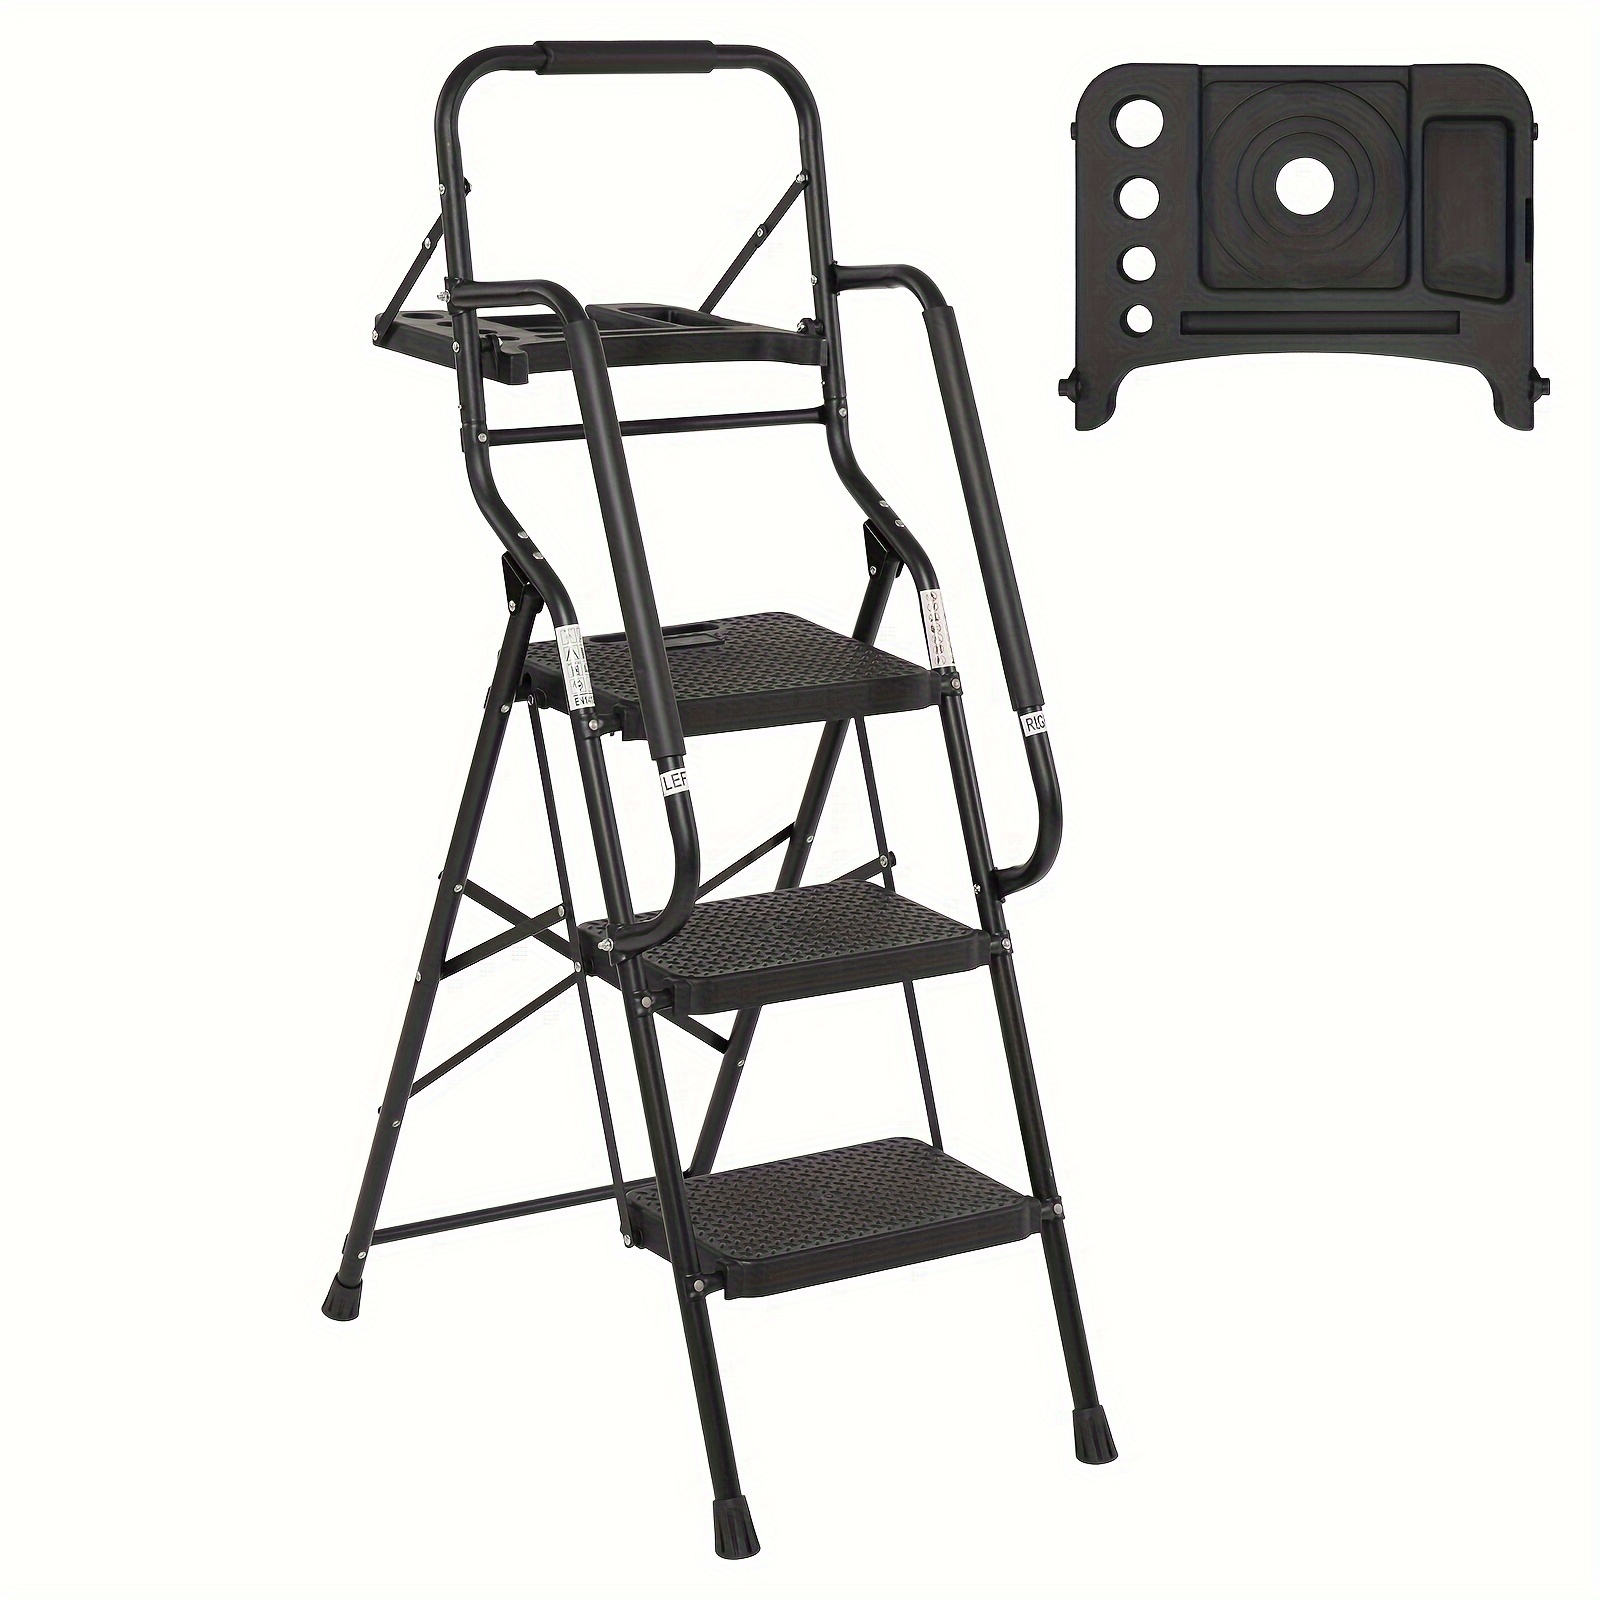 

Step Ladder With Handrails Folding Step Stool With Tool Plateform, 330 Lb Capacity For Adults Portable Ladder For Home Kitchen Steel Frame With Non-slip Wide Pedal